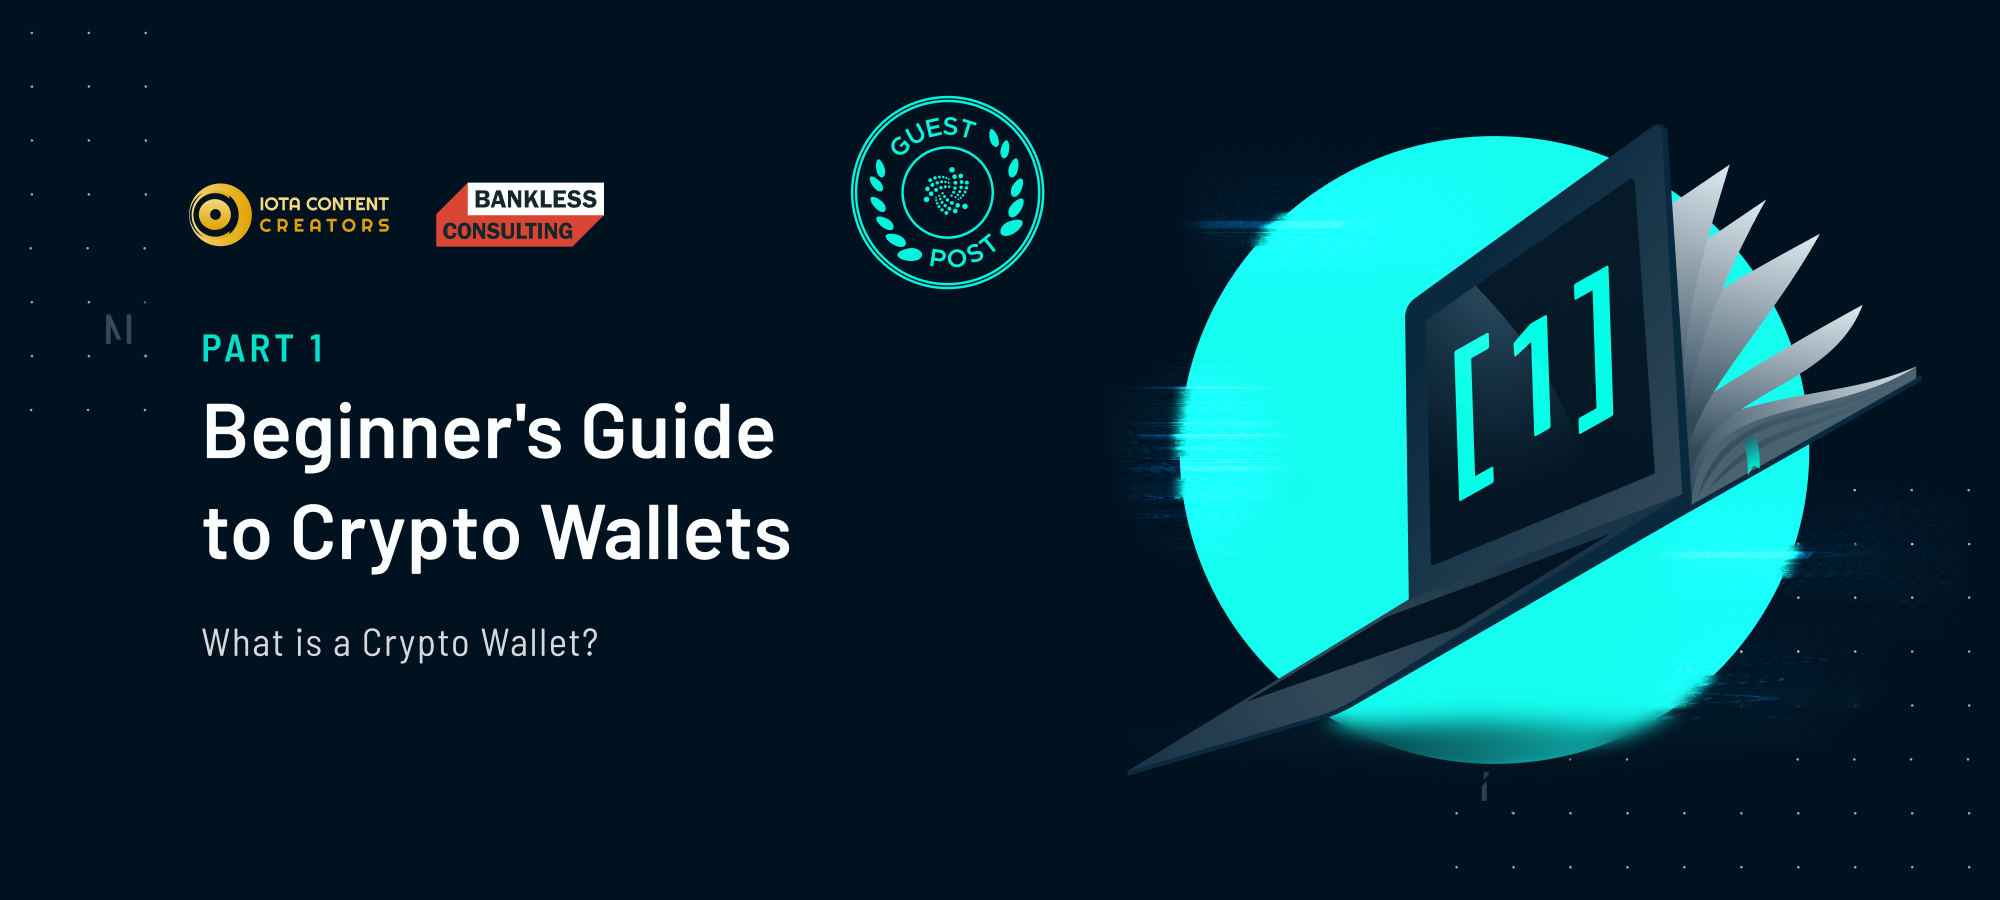 Beginner&apos;s Guide to Crypto Wallets: Part 1